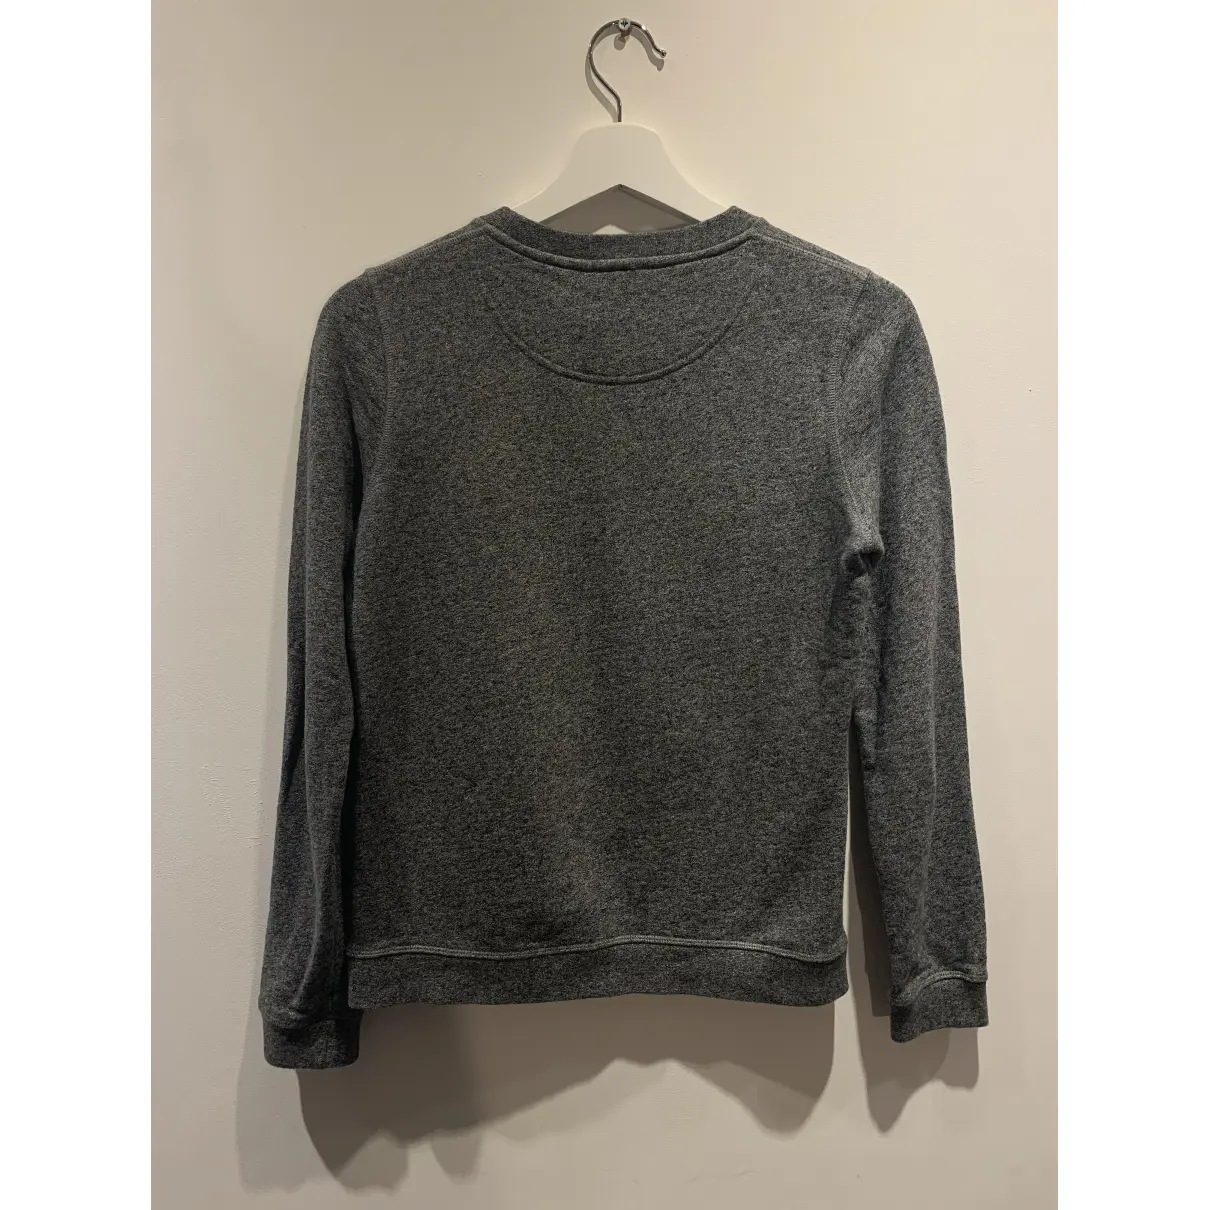 Buy Kenzo Anthracite Cotton Knitwear online